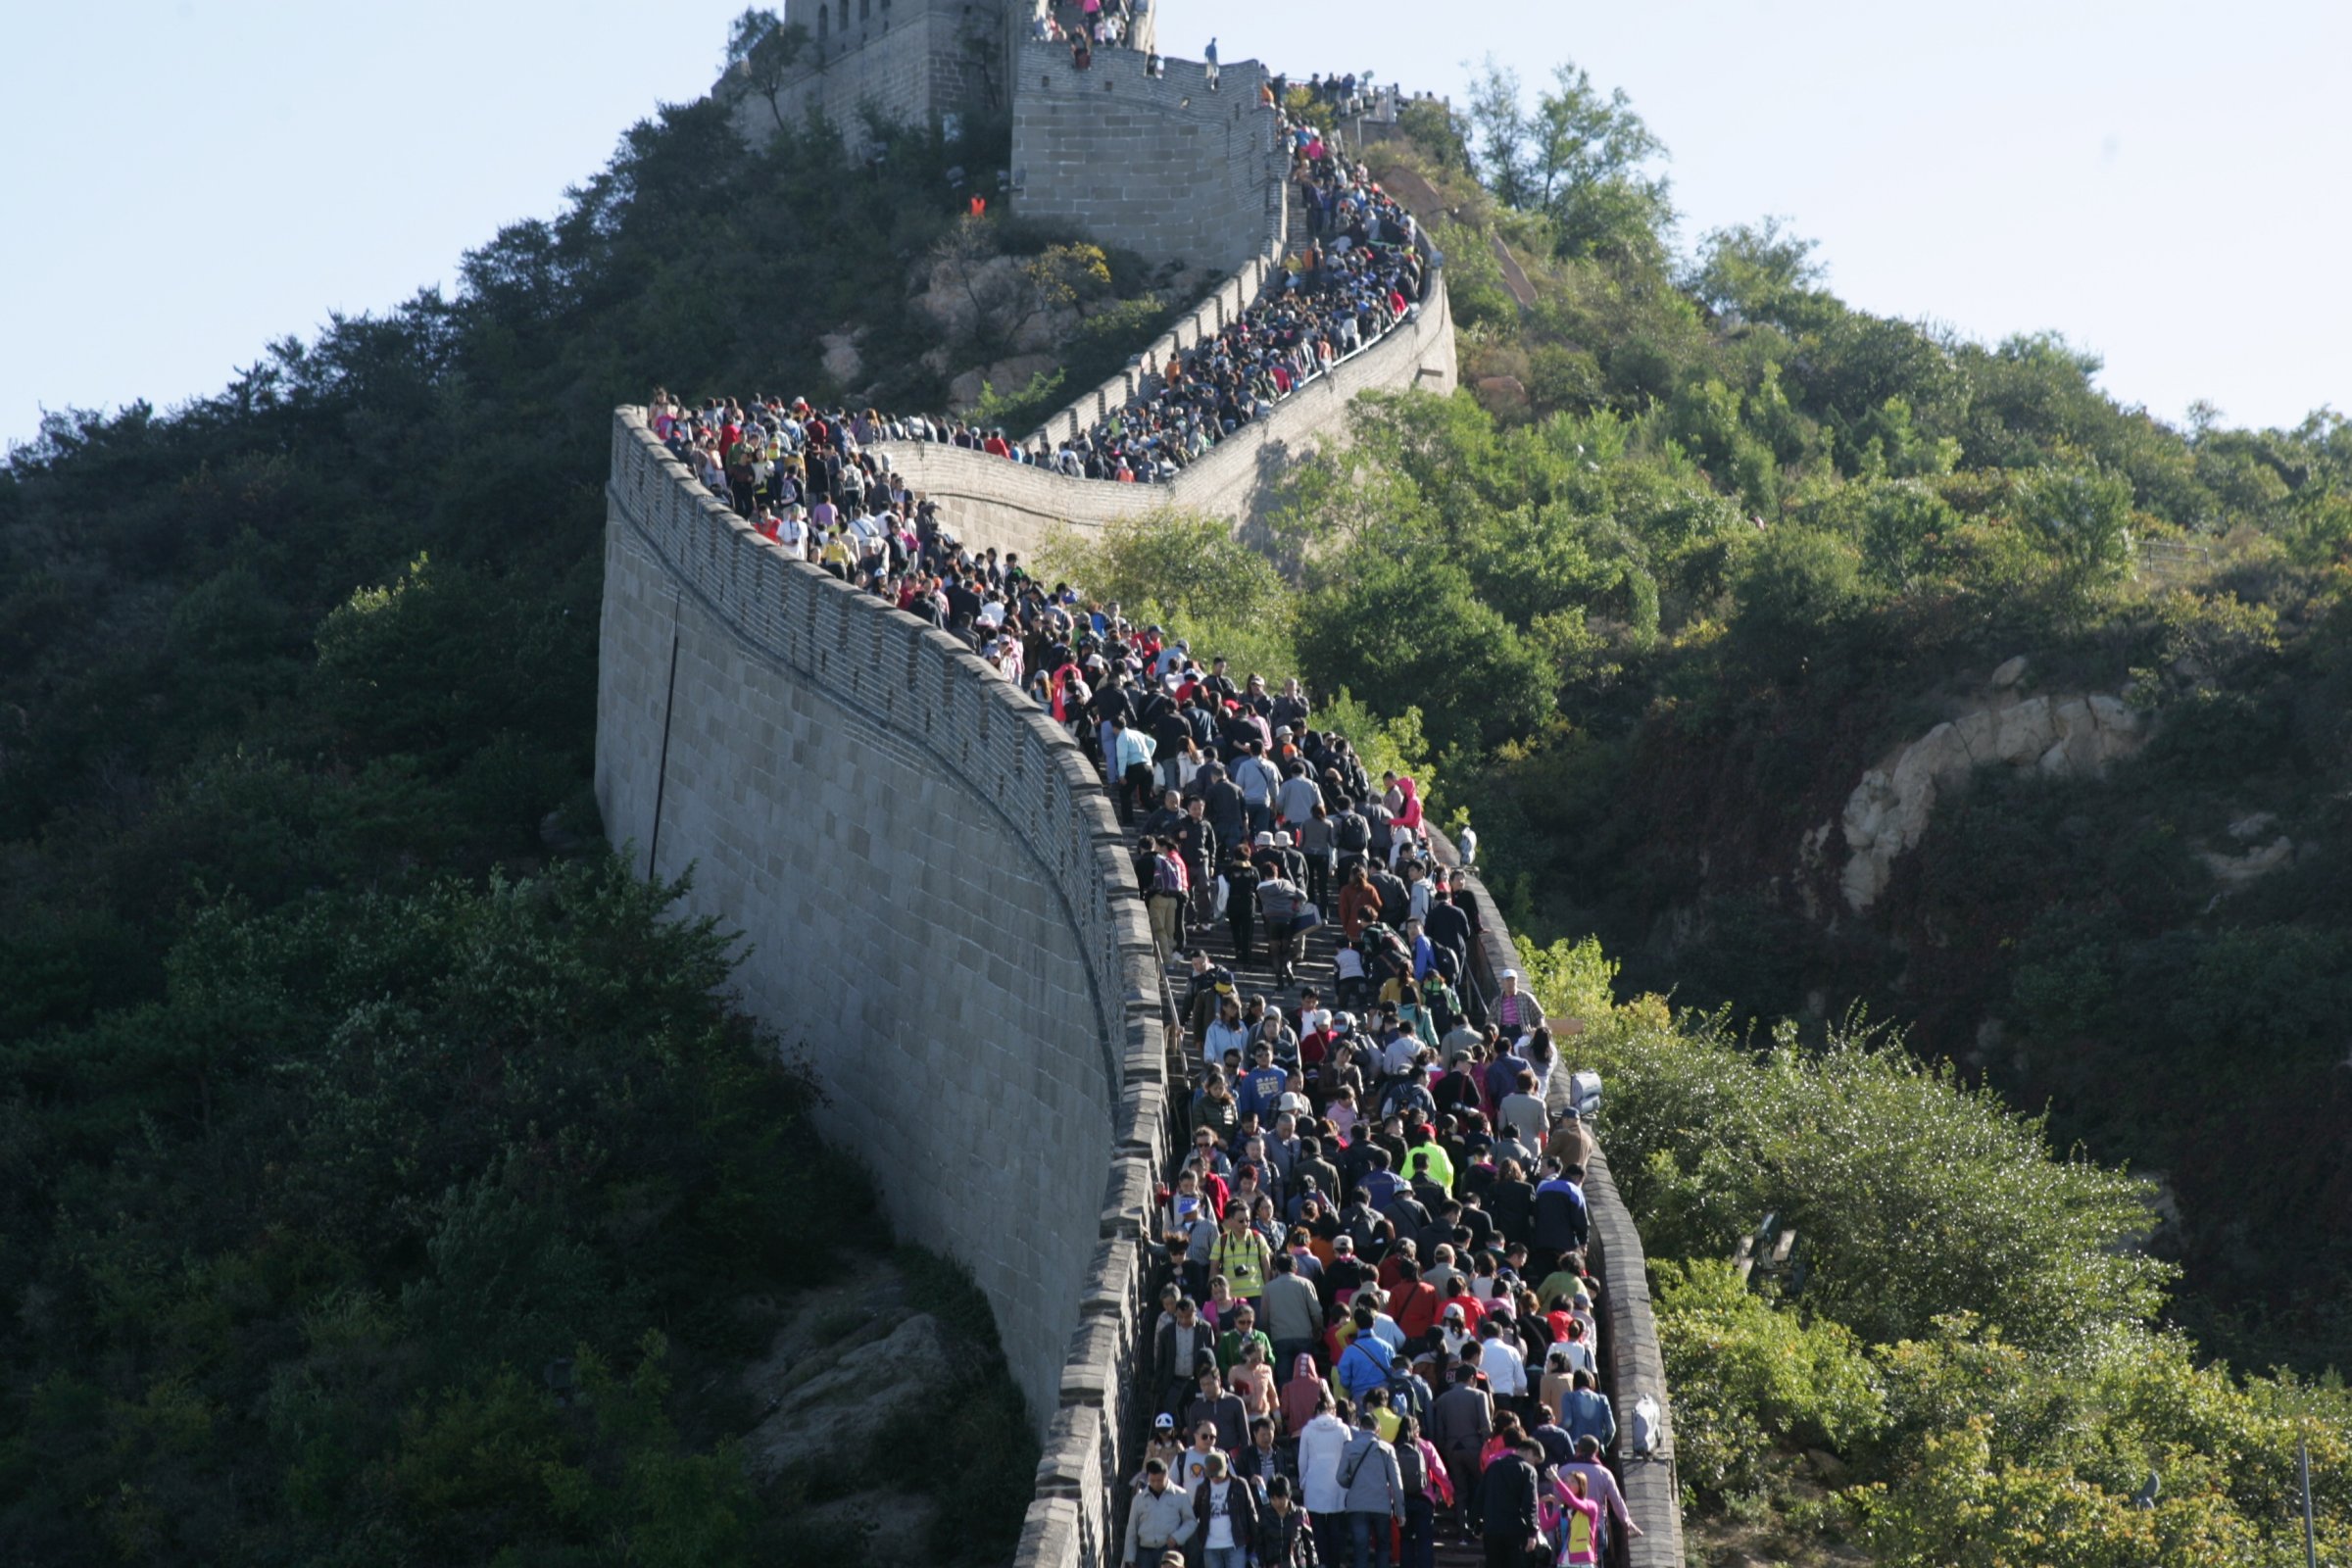 People crowded to visit the Great Wall on October 2, 2013 in Beijing, China.